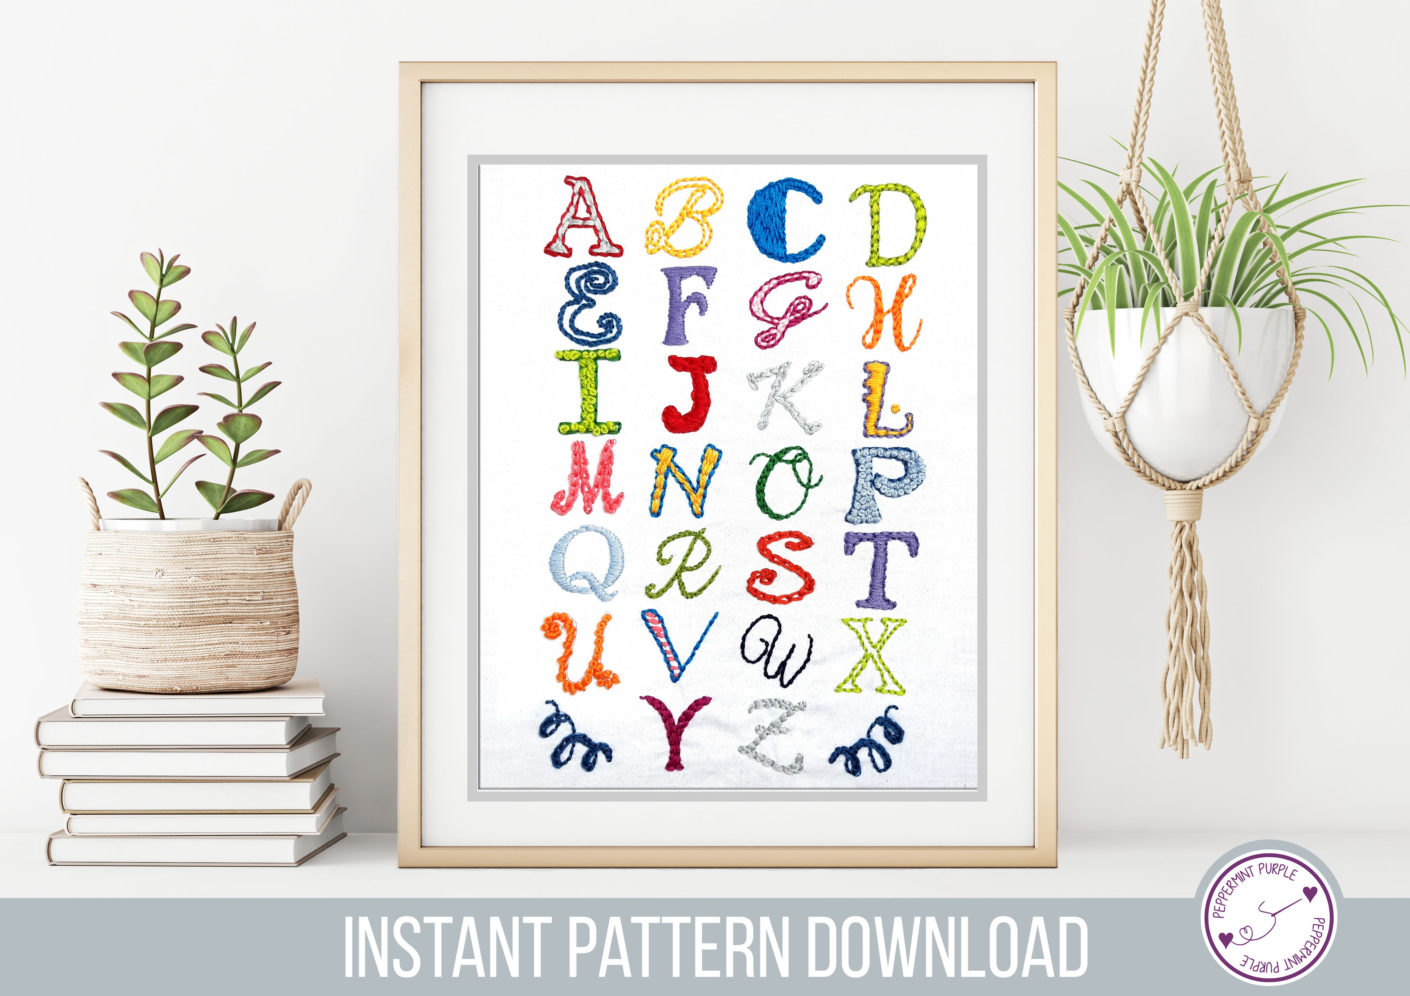 Hand Embroidery Sampler Patterns Hand Embroidery Alphabet Sampler Pattern Peppermint Purple